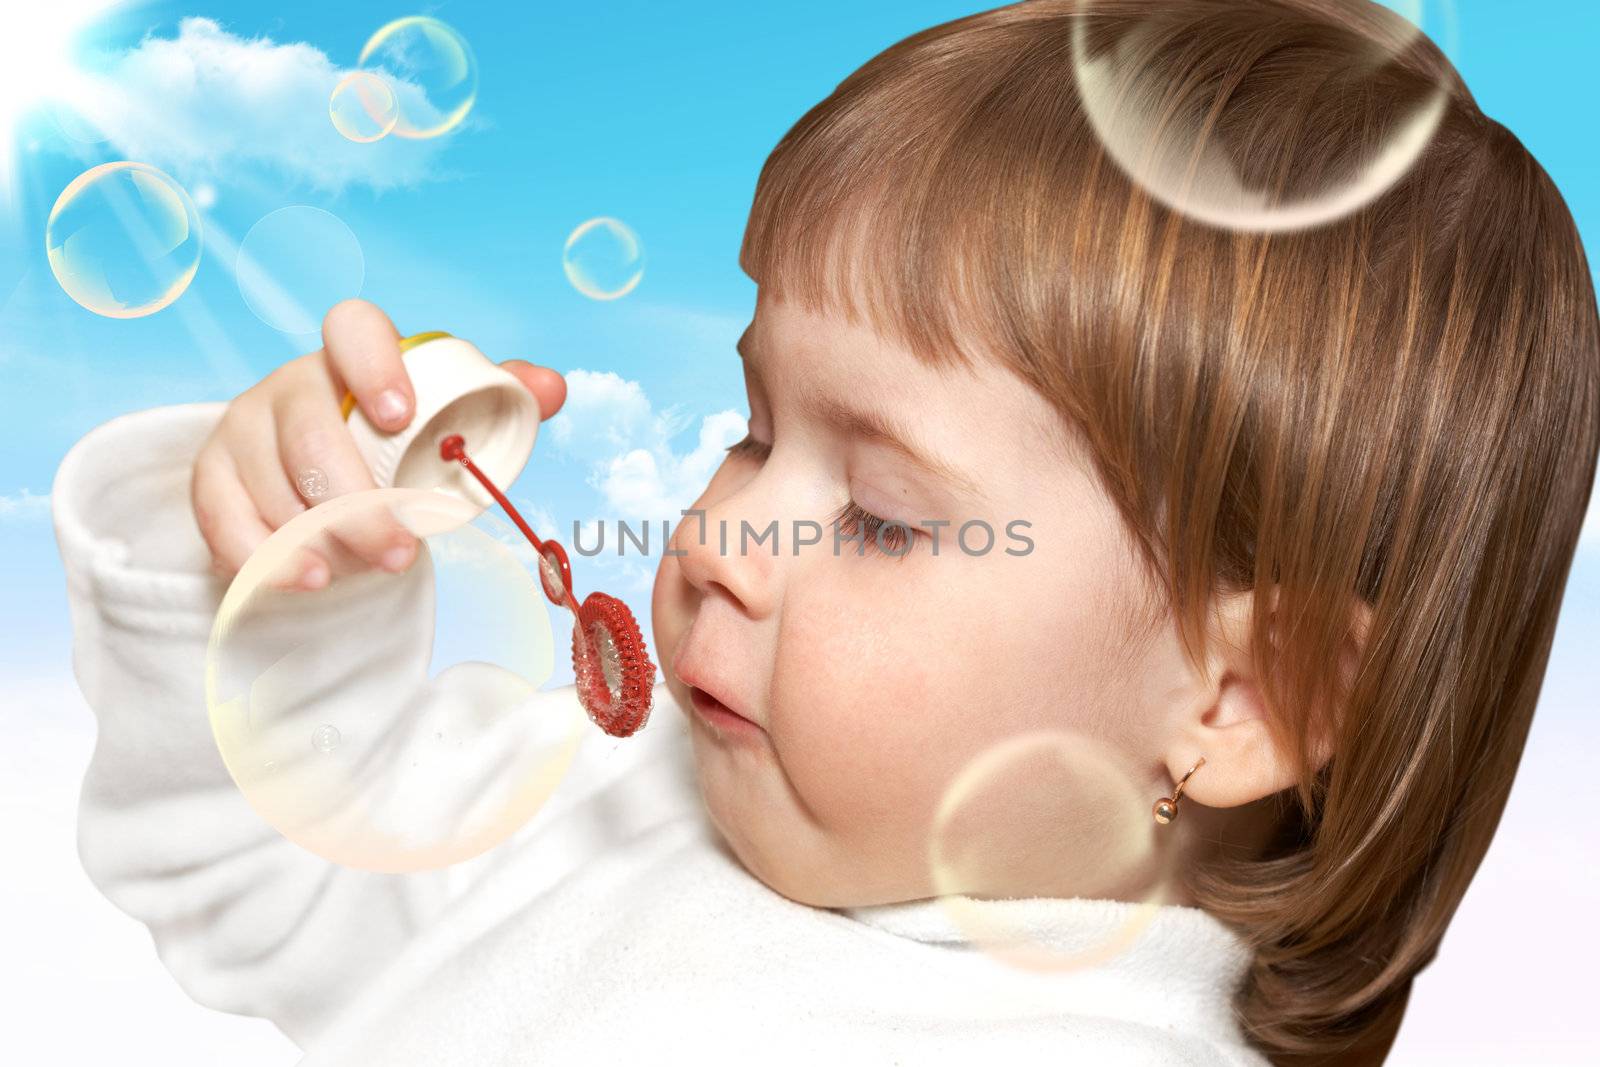 Soap bubbles. The small girl plays with soap bubbles